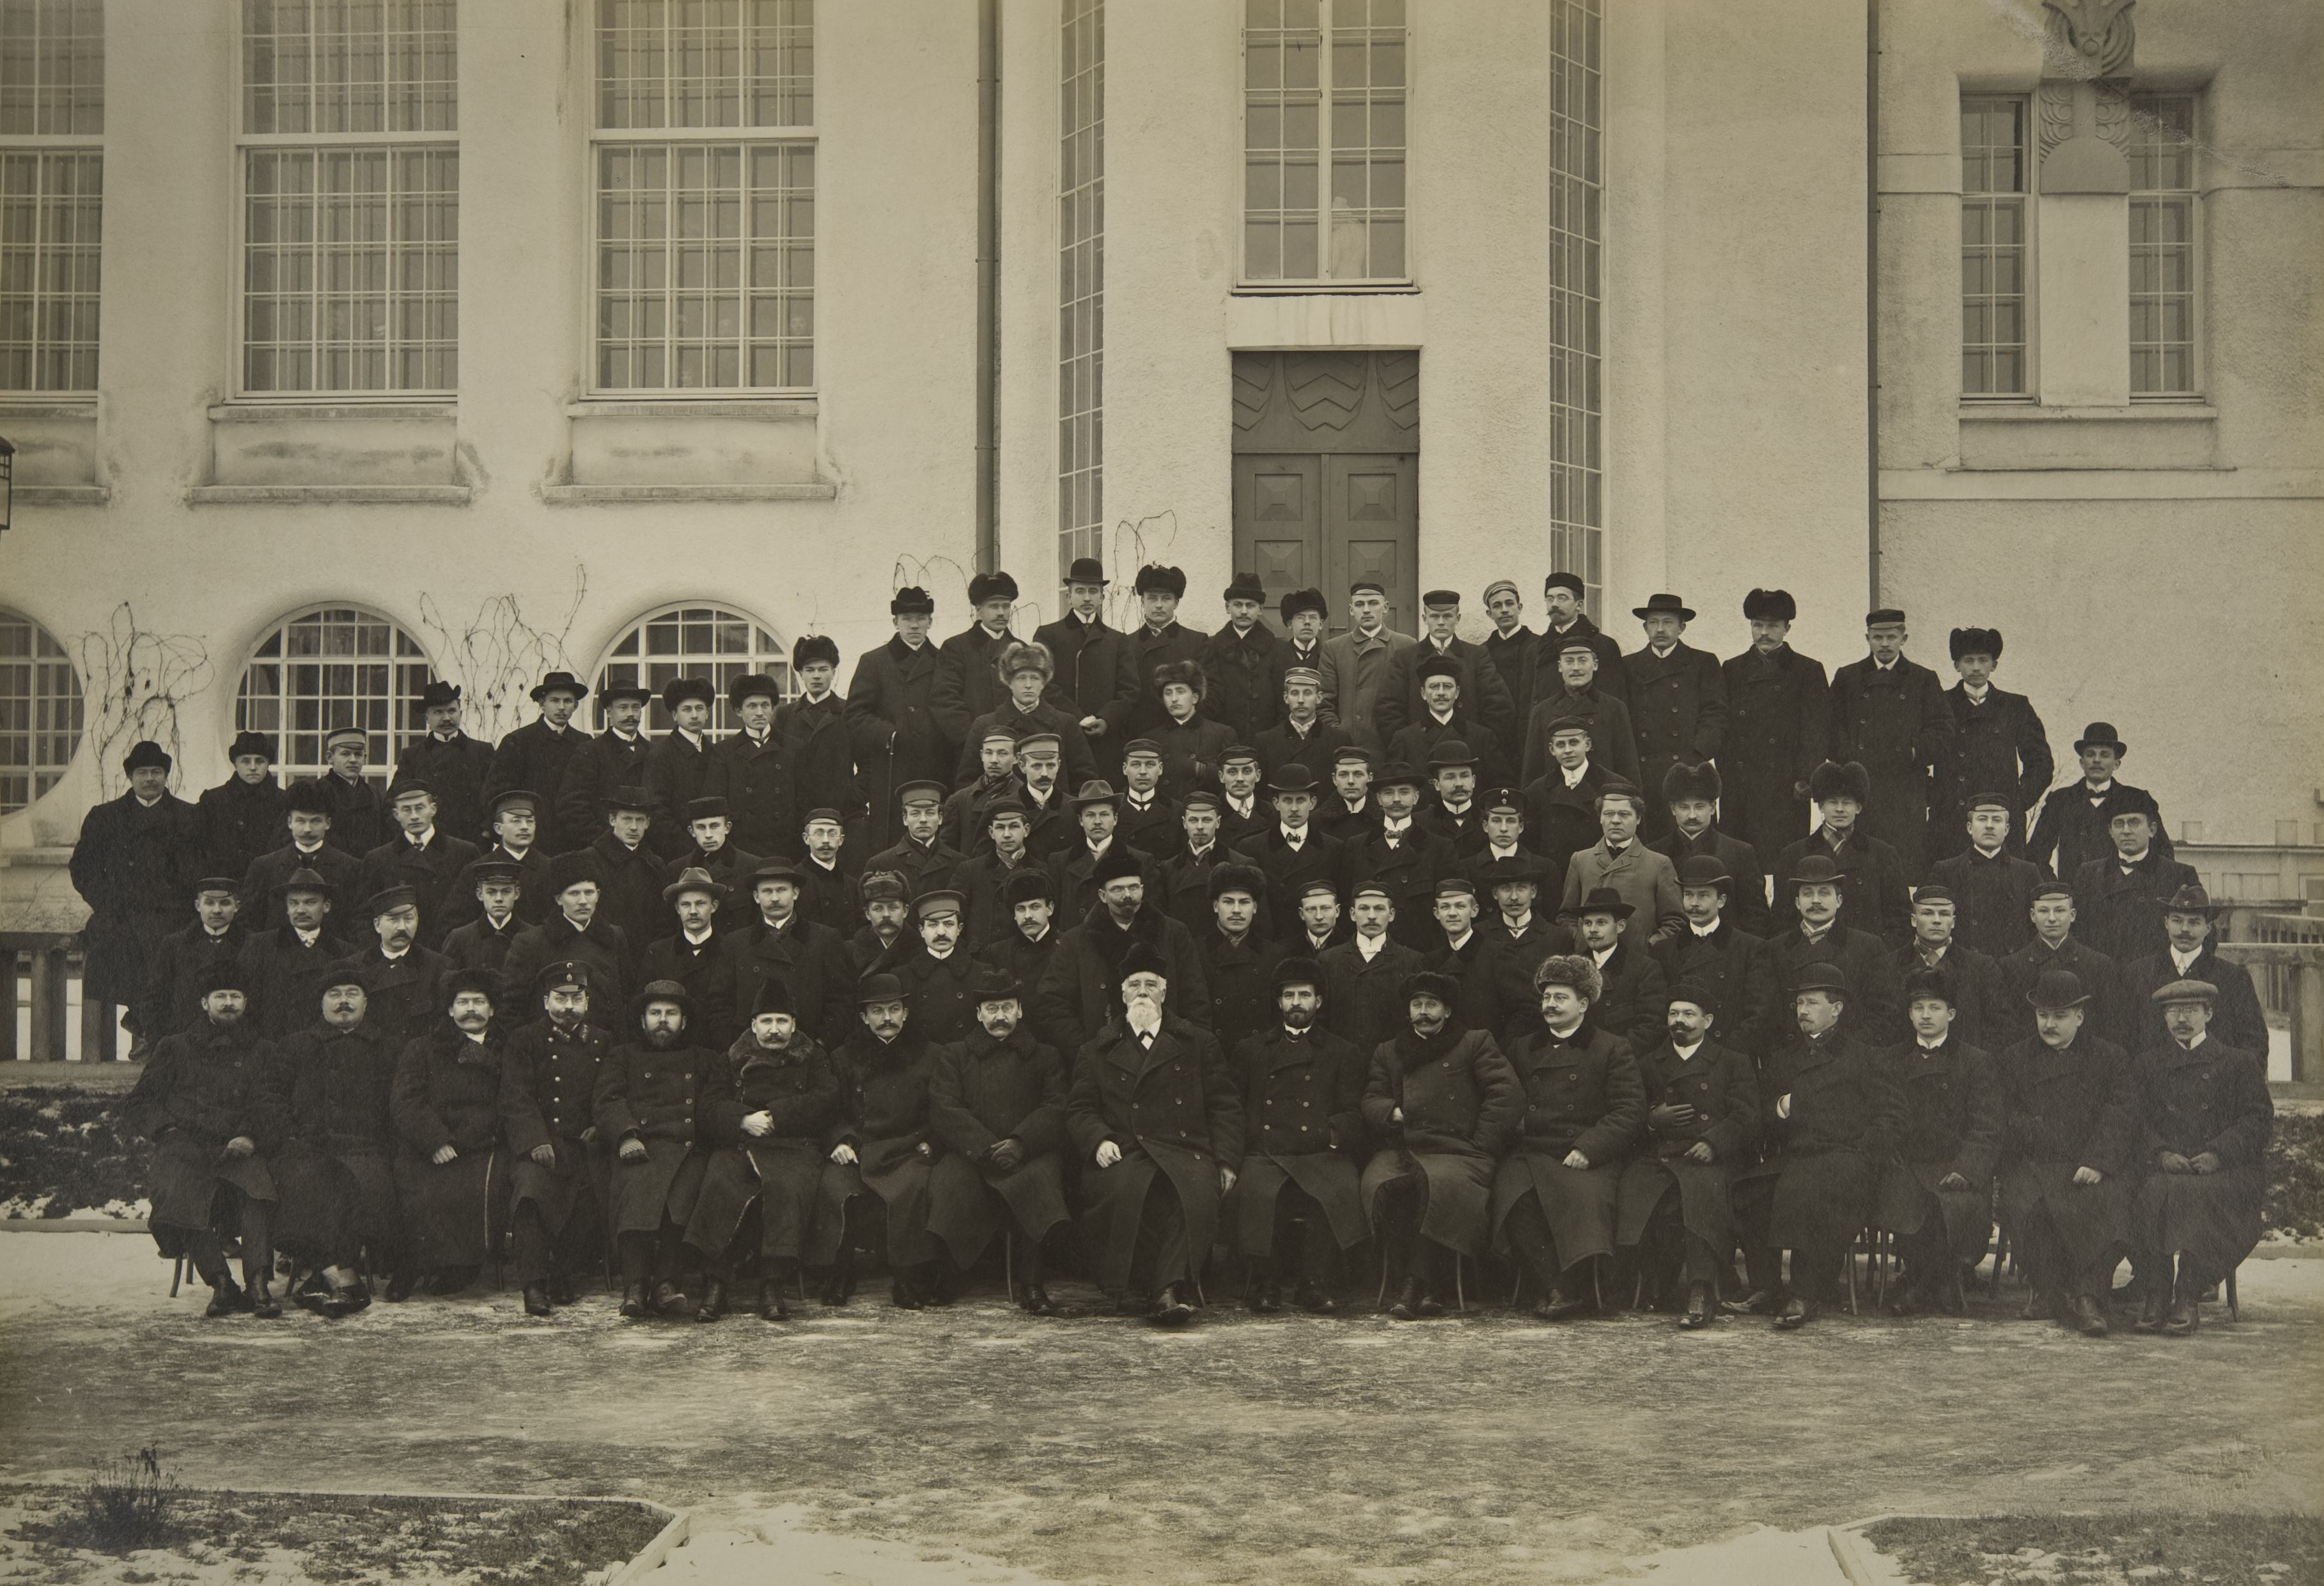 In the case of the jubilee of the 25th anniversary of the University of Tartu in 1908.